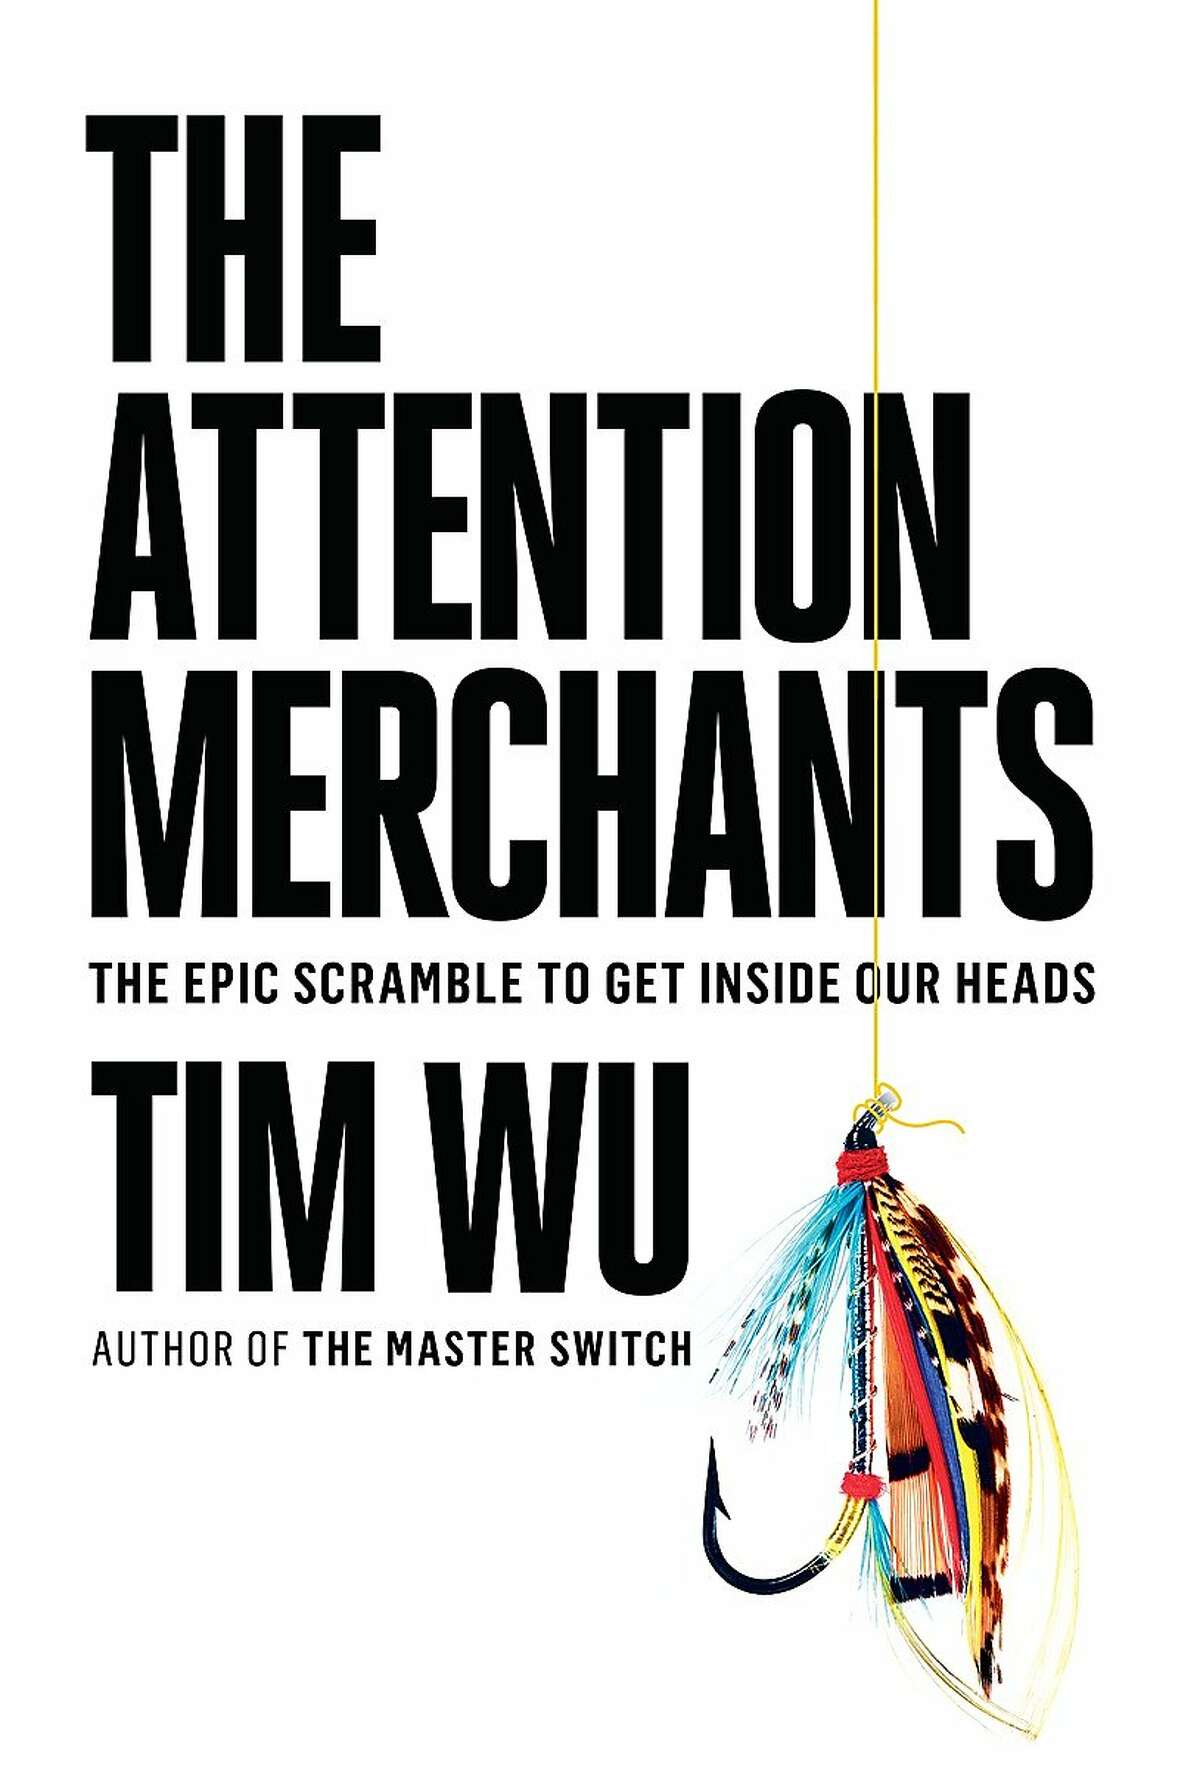 "The Attention Merchants"